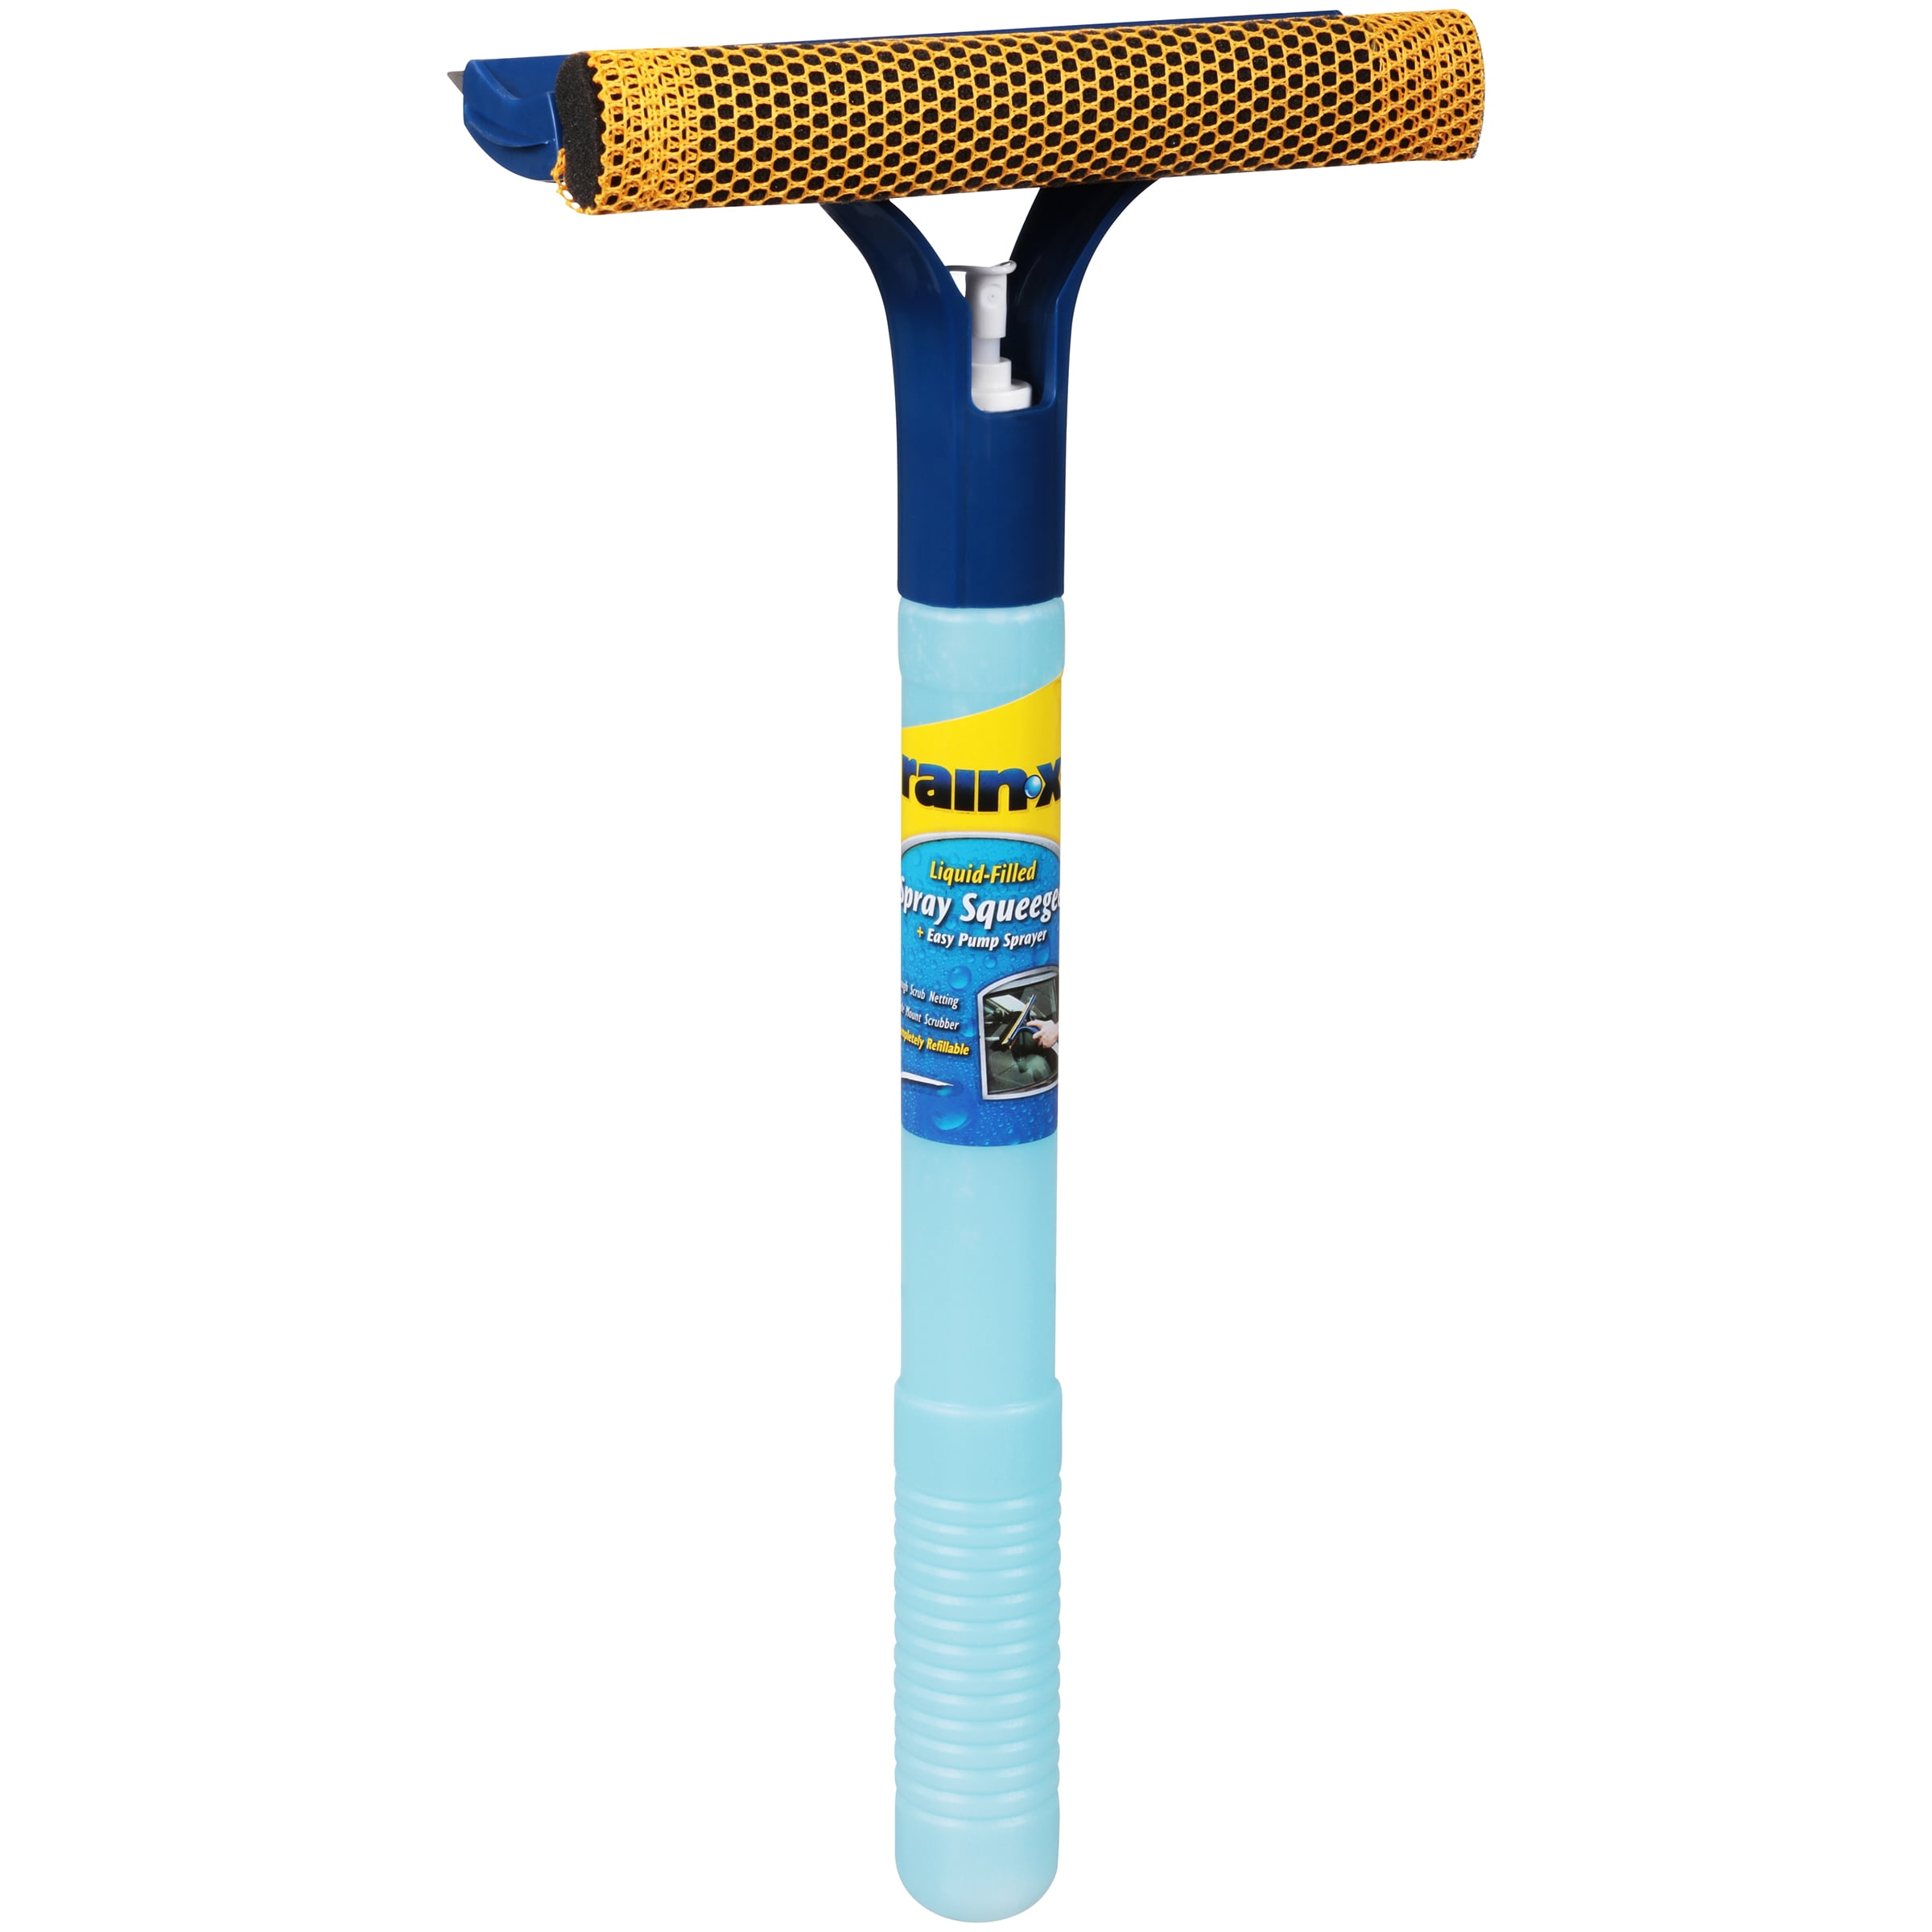 Rain-X Collapsible Compact Squeegee 9438x